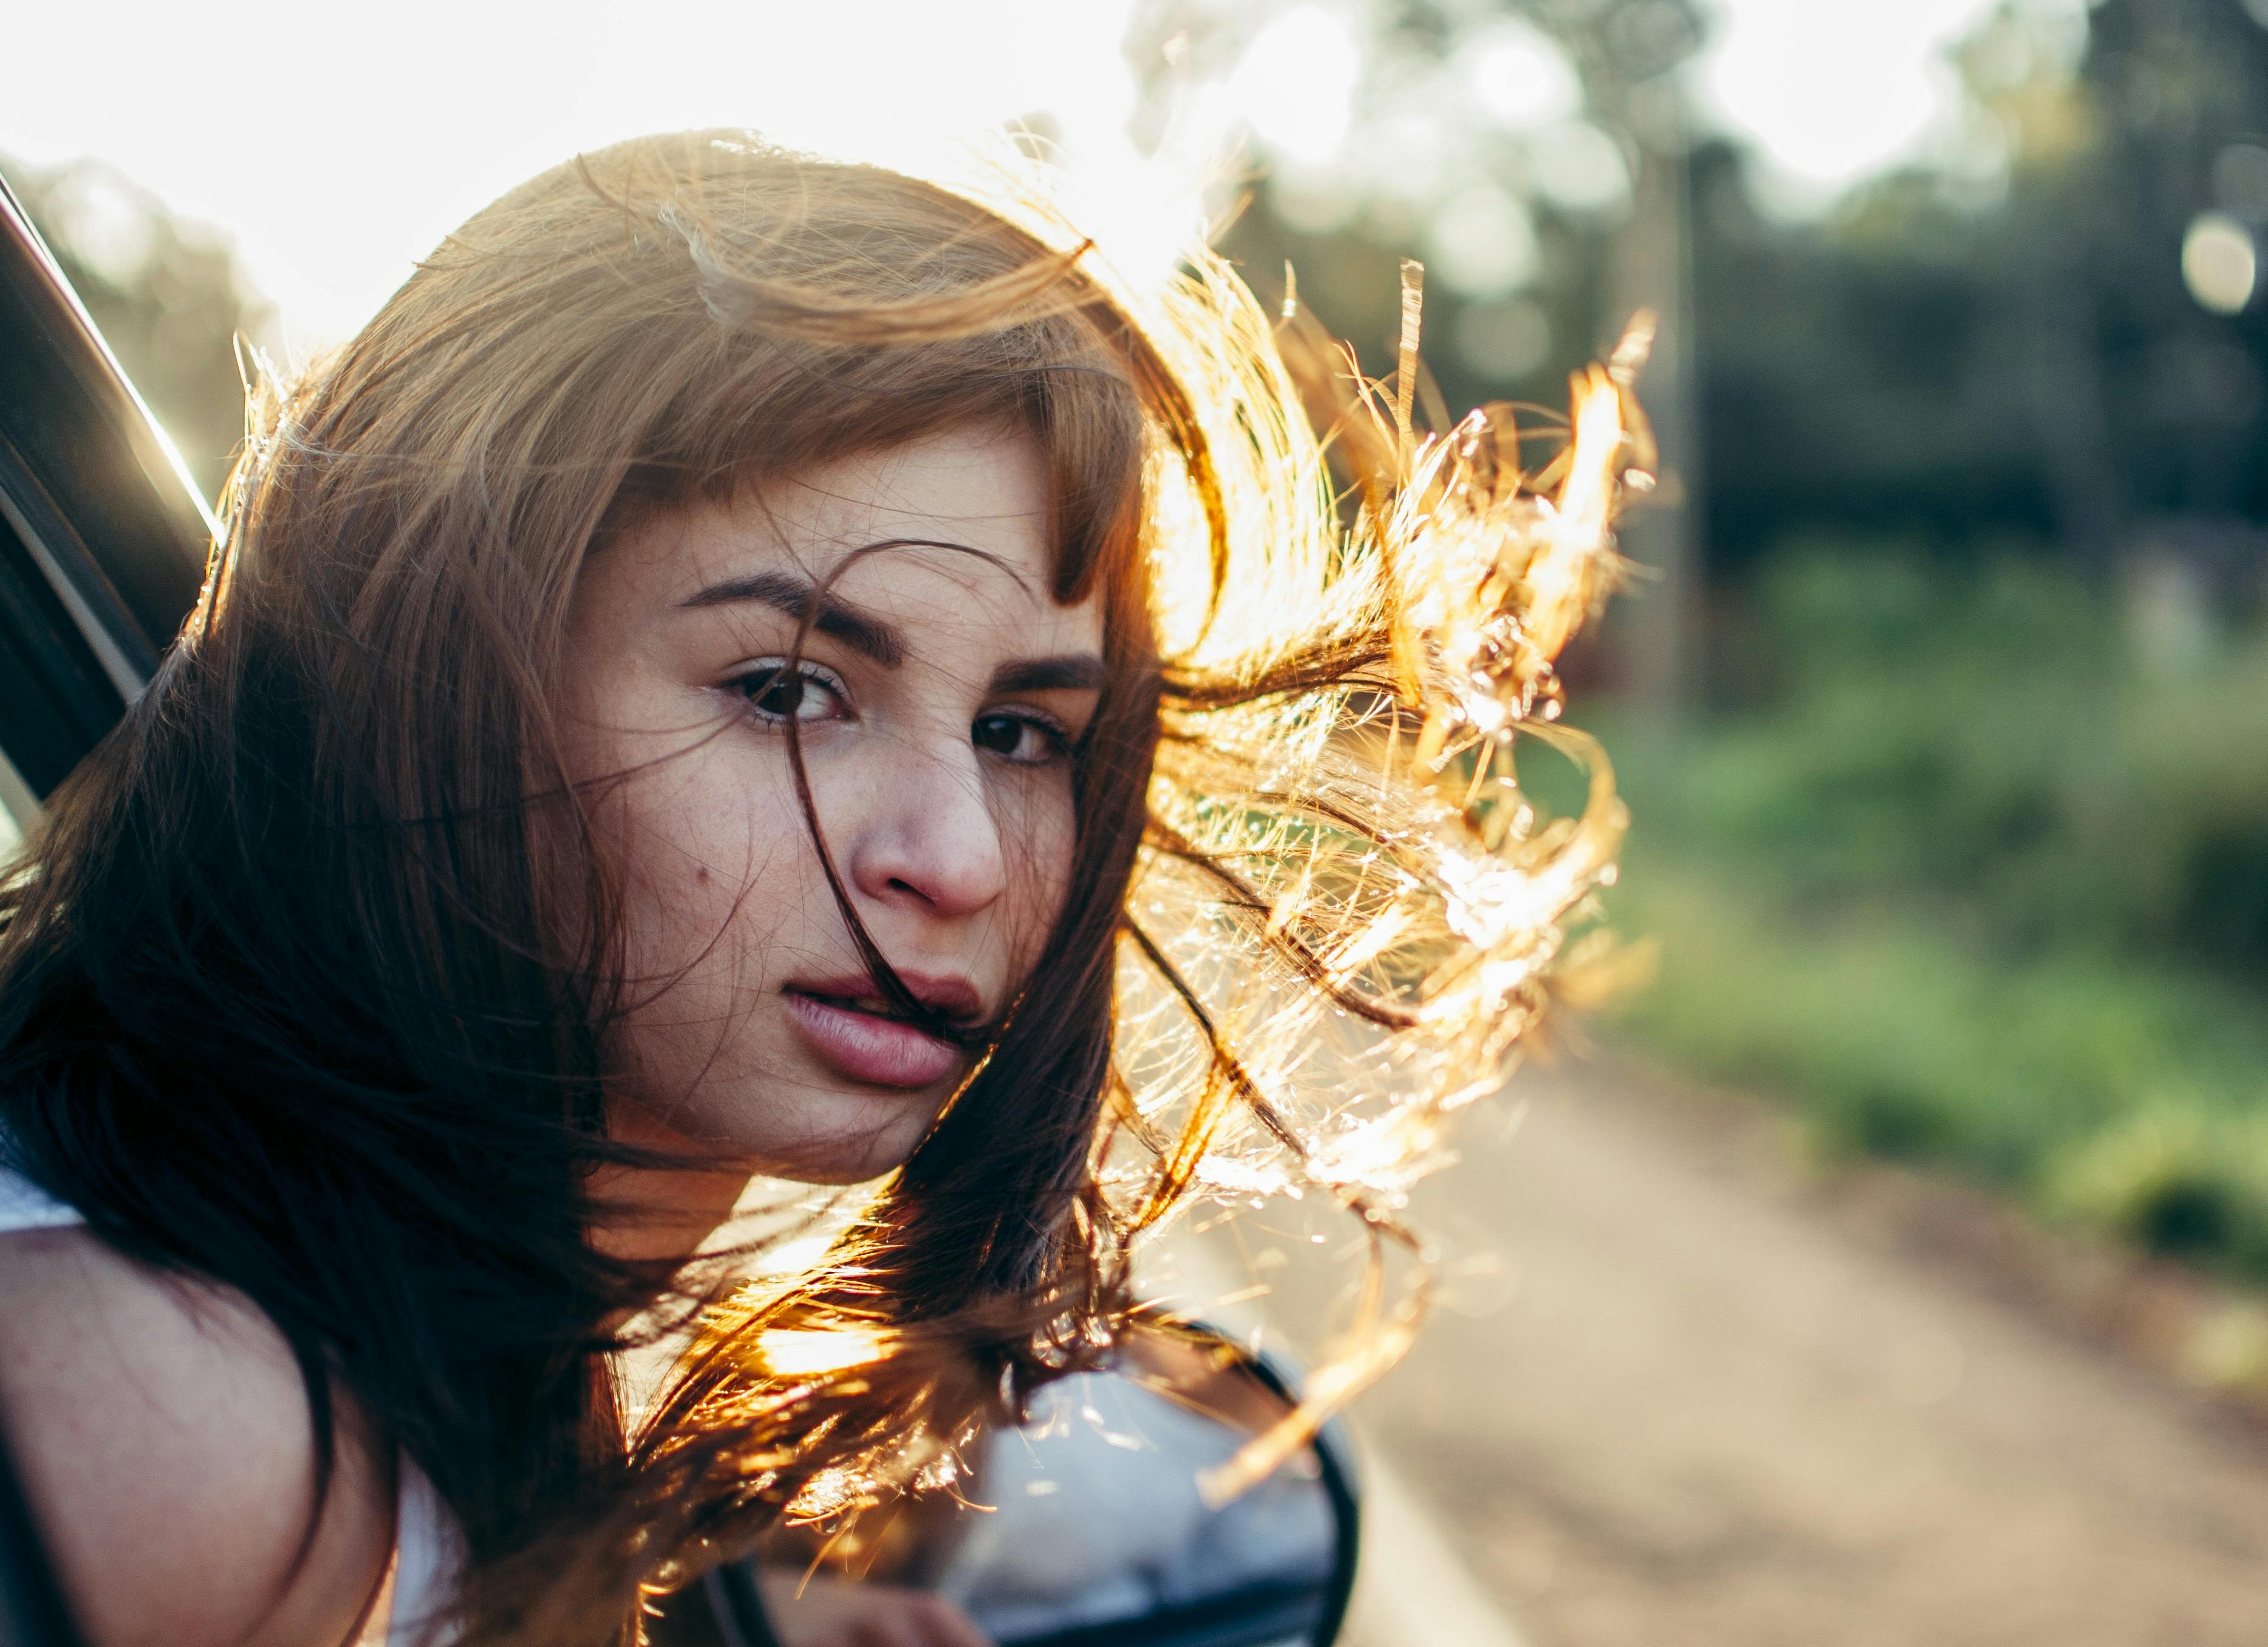 A young girl with her head outside a car window while being driven | Source: Pexels